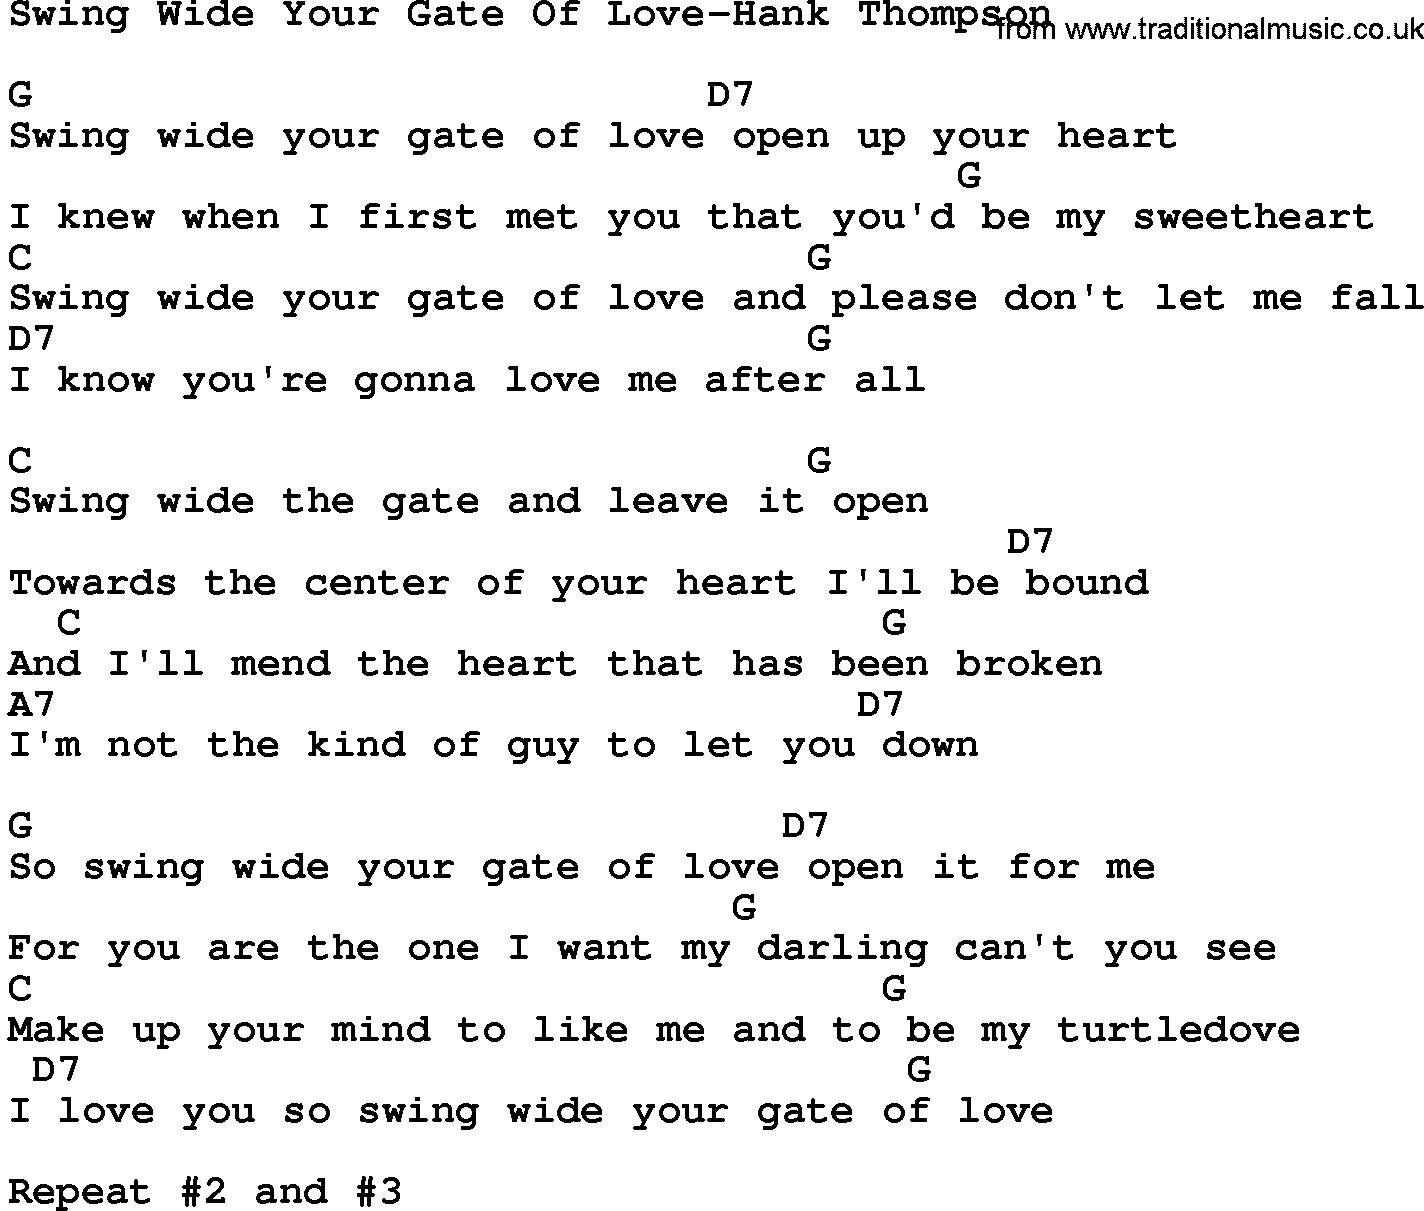 Country music song: Swing Wide Your Gate Of Love-Hank Thompson lyrics and chords